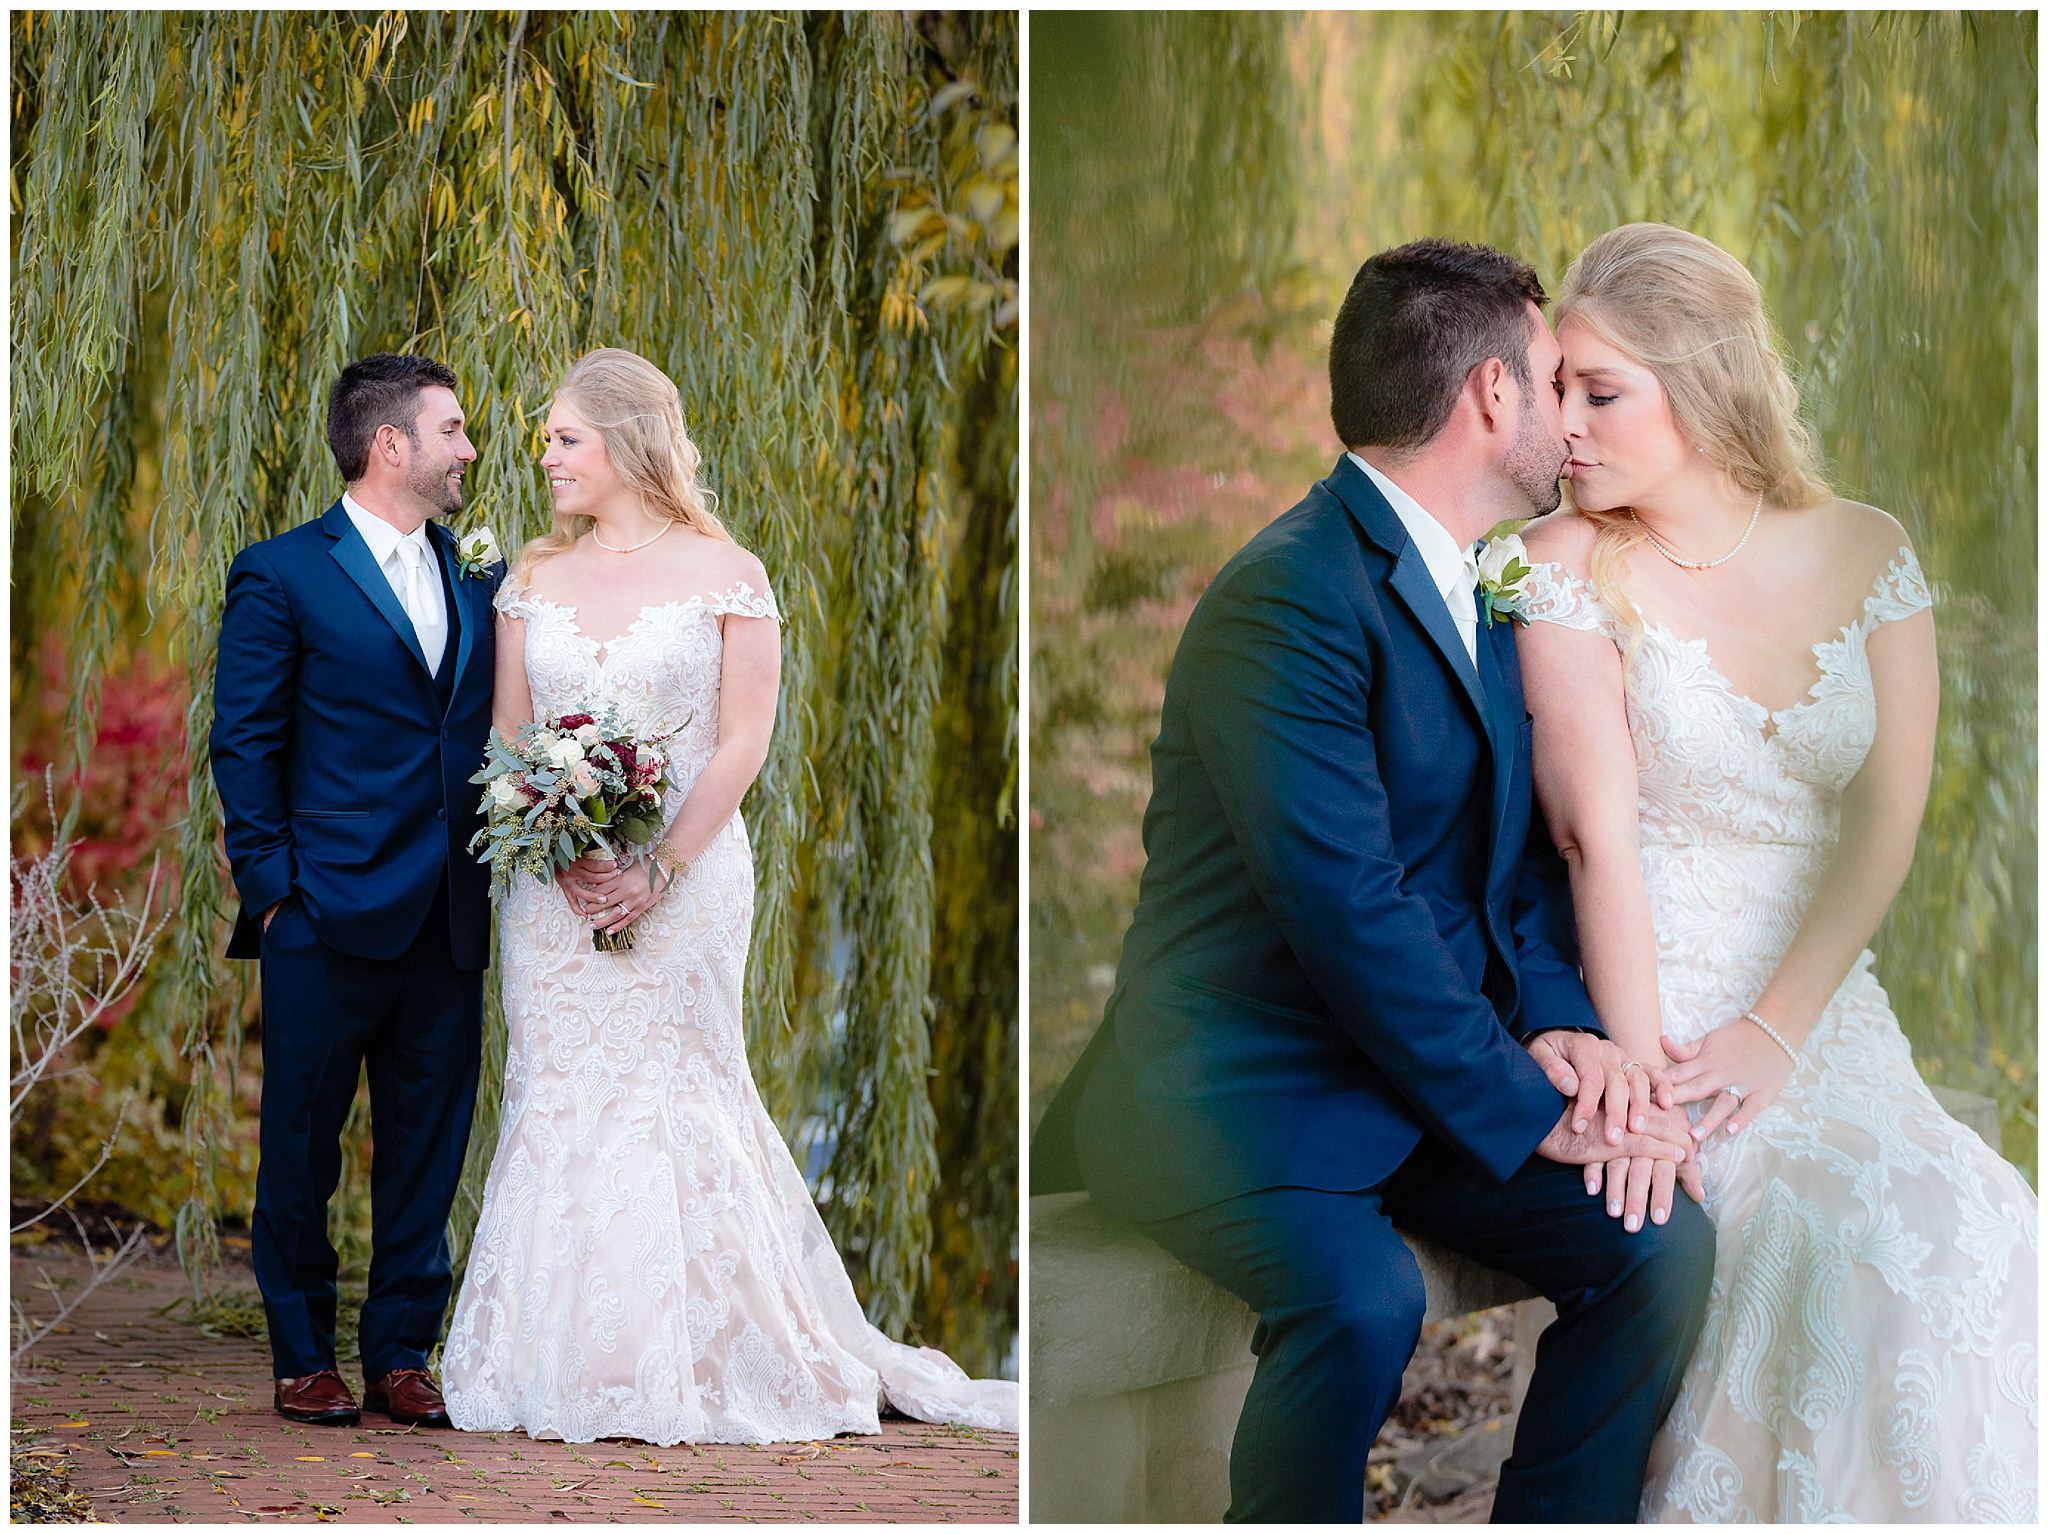 Newlyweds kiss under a willow tree at Riverside Landing